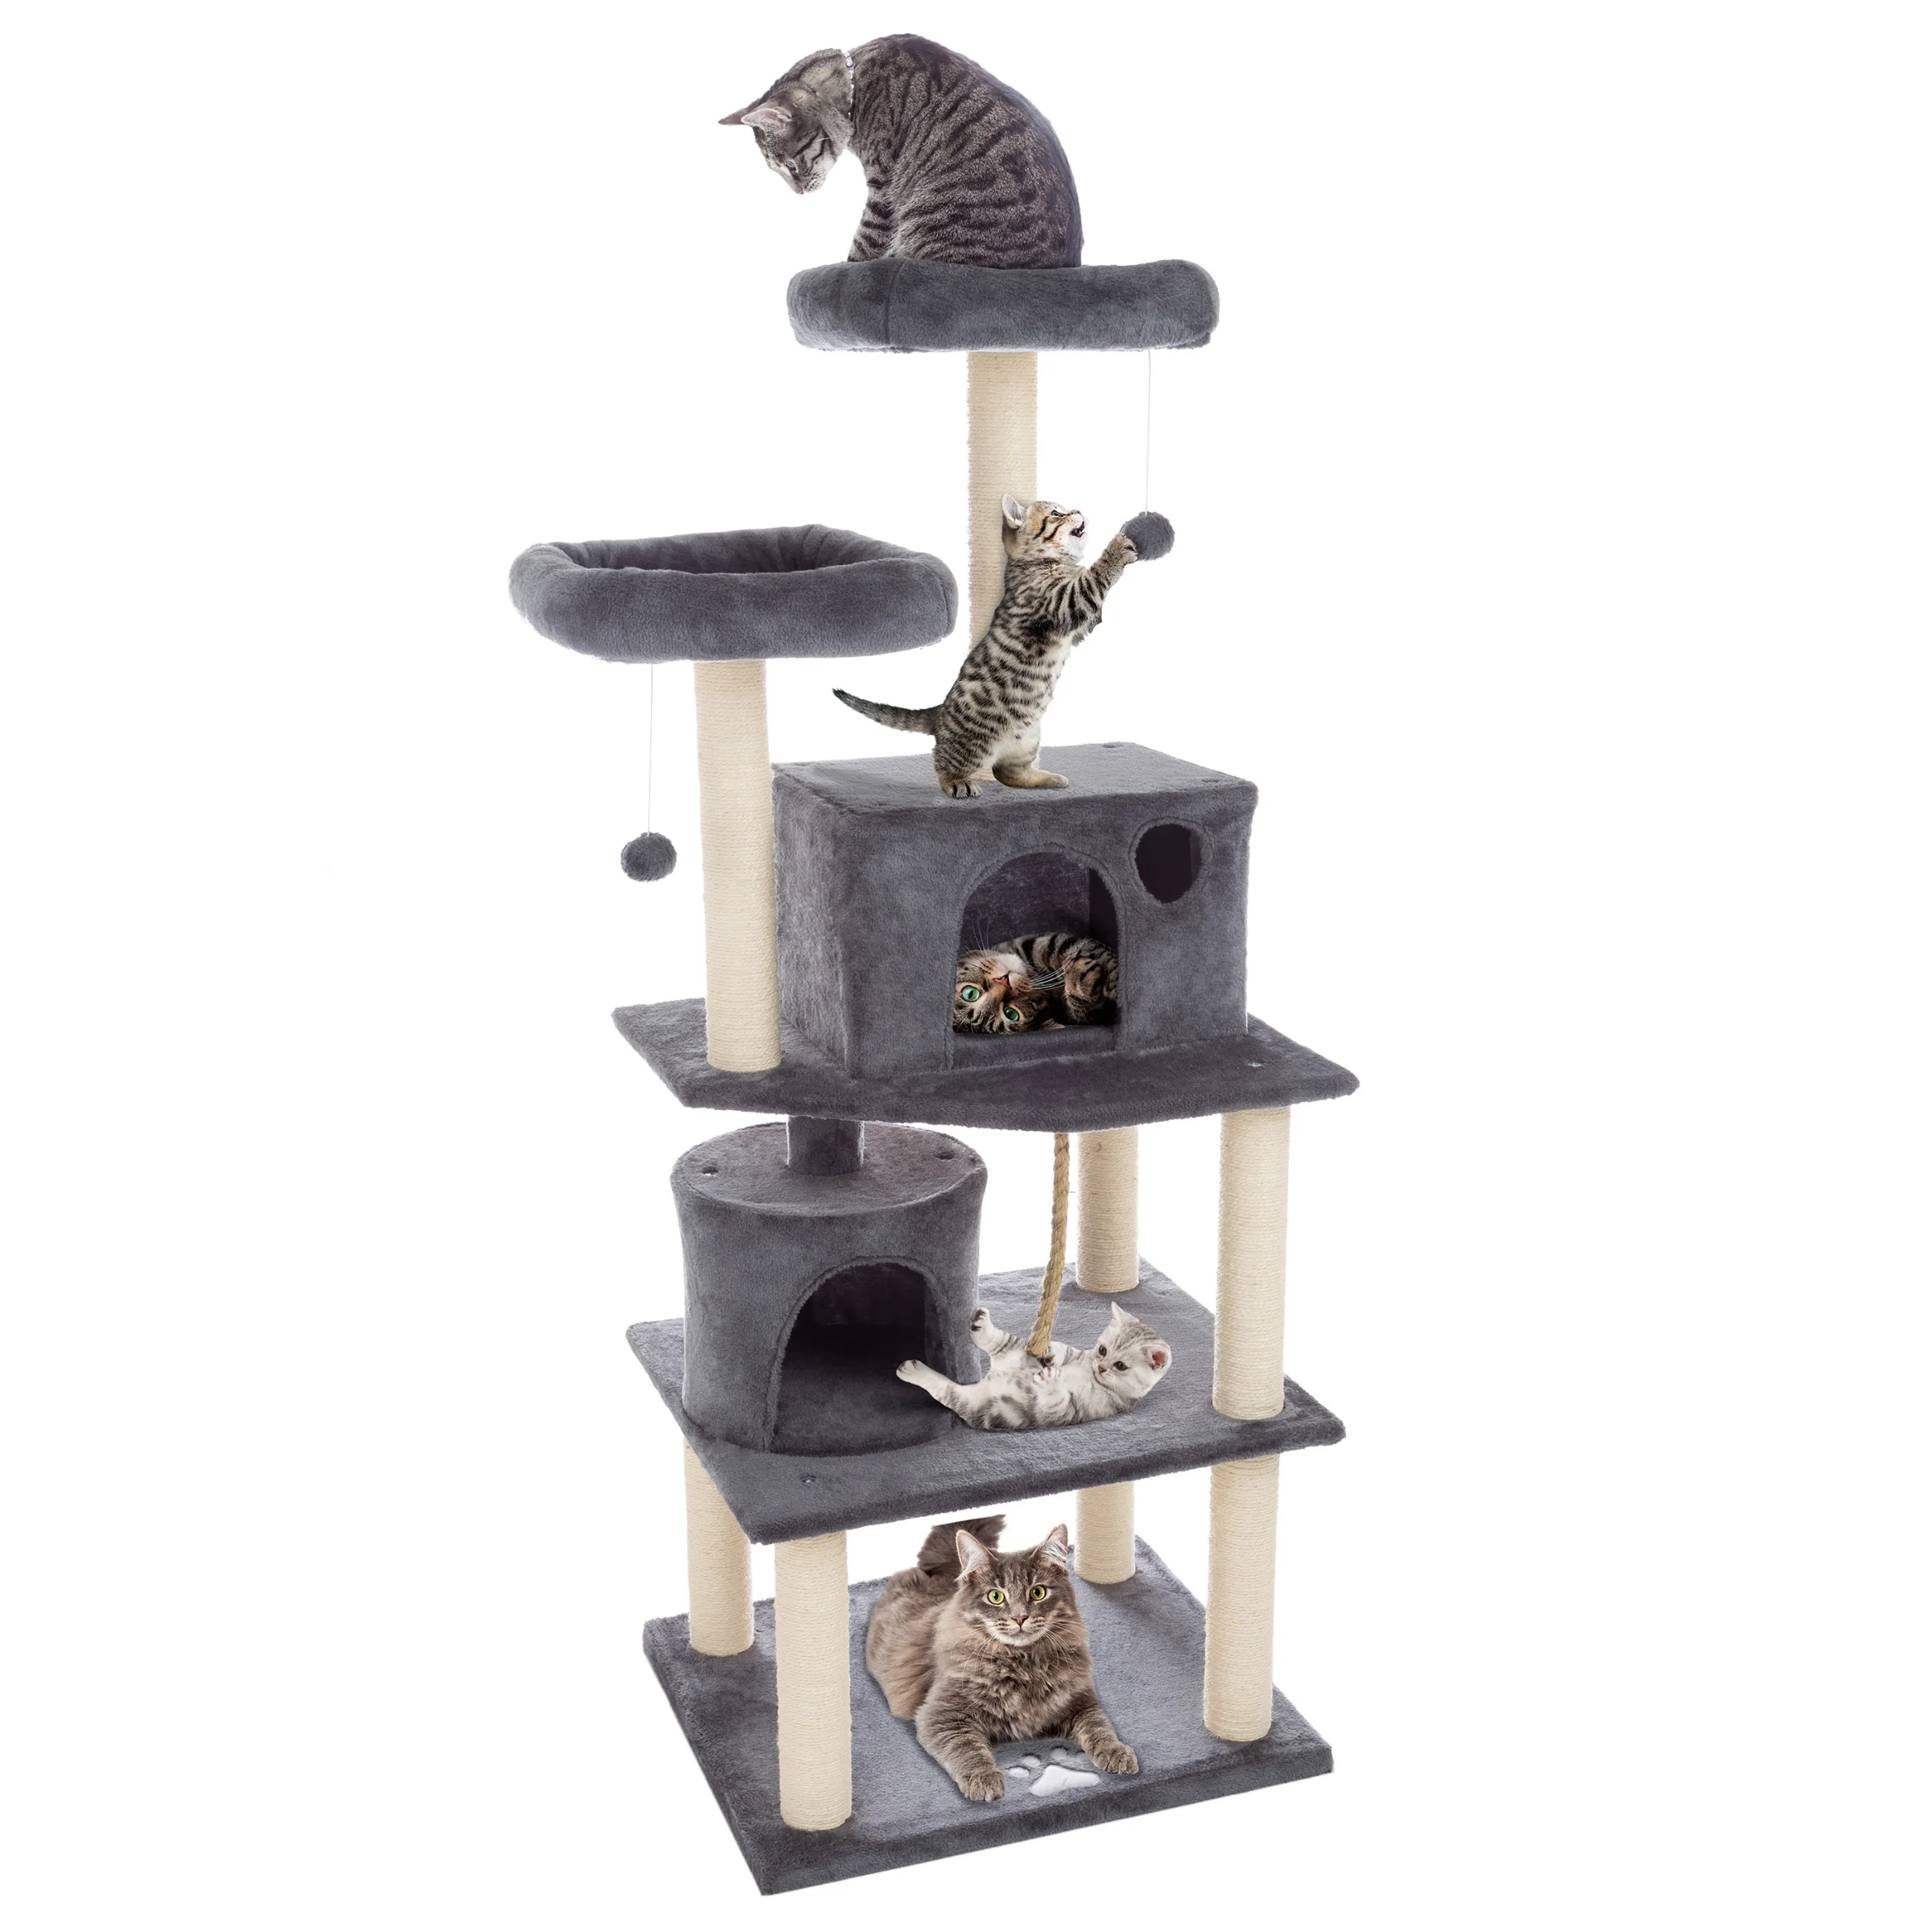 

5-Tier Ultimate Condo Tower- 8 Scratching Posts, 2 Padded Perches, 2 Kitty Huts, and 3 Hanging Toys for Multiple Cats by (Dark